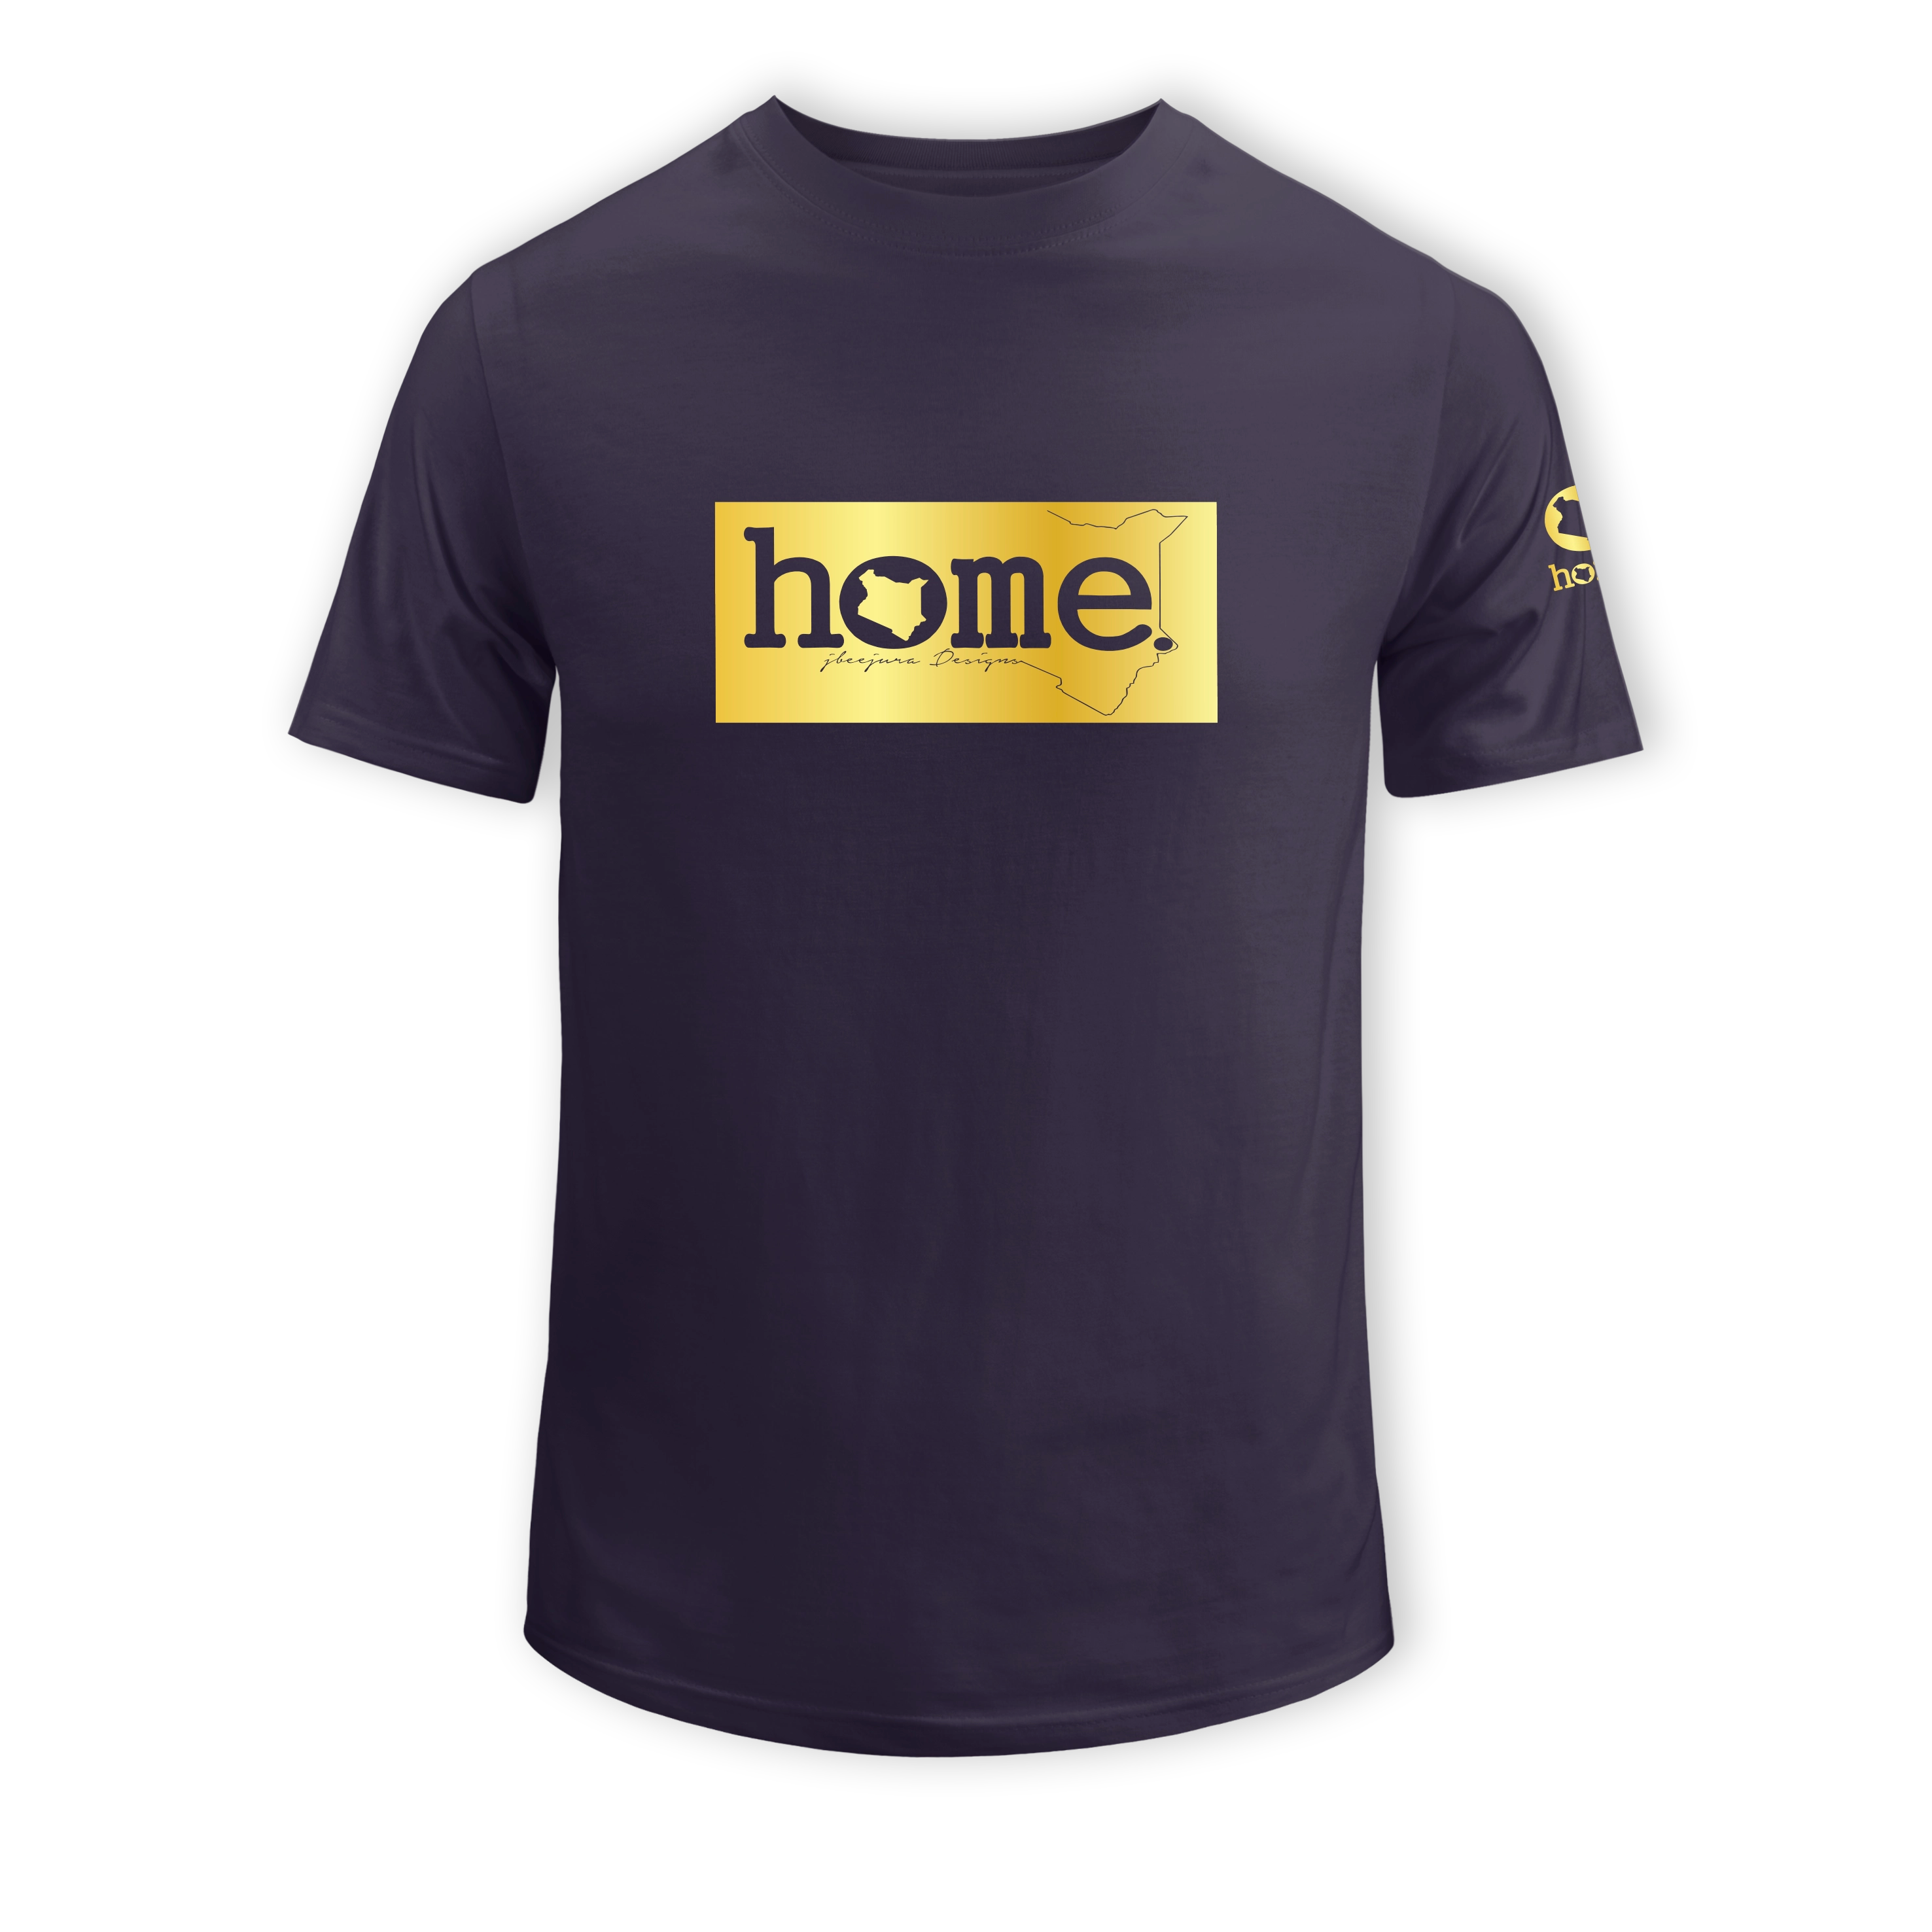 home_254 KIDS SHORT-SLEEVED RICH PURPLE T-SHIRT WITH A GOLD CLASSIC PRINT – COTTON PLUS FABRIC